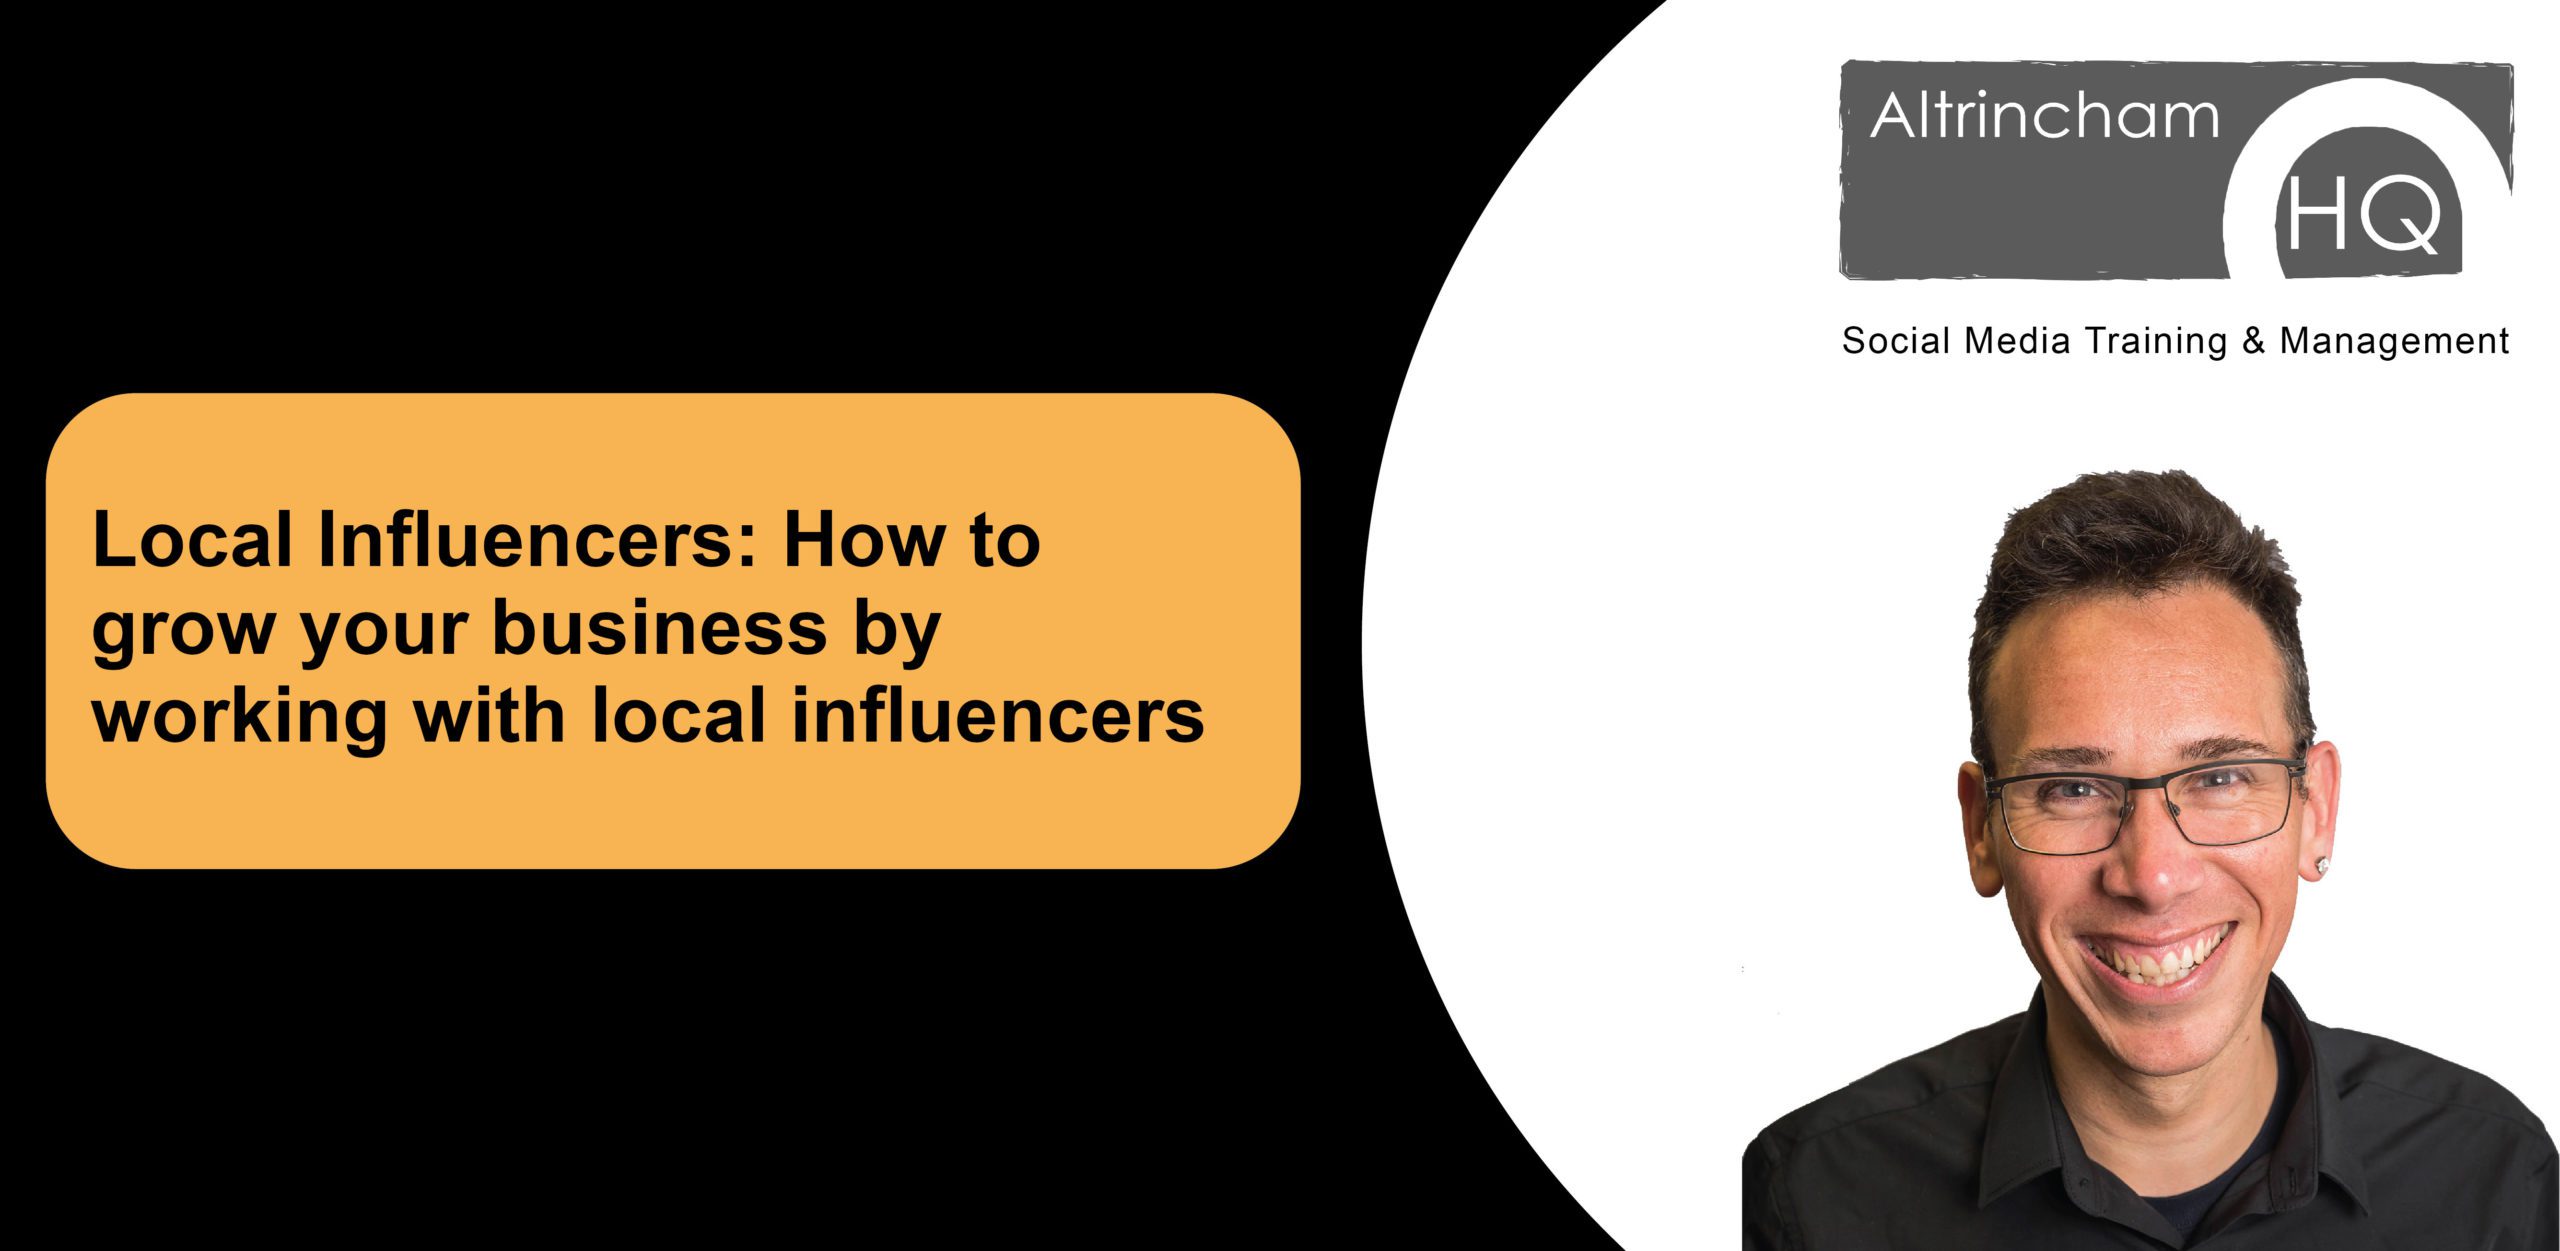 Local Influencers: How to grow your business by working with local influencers